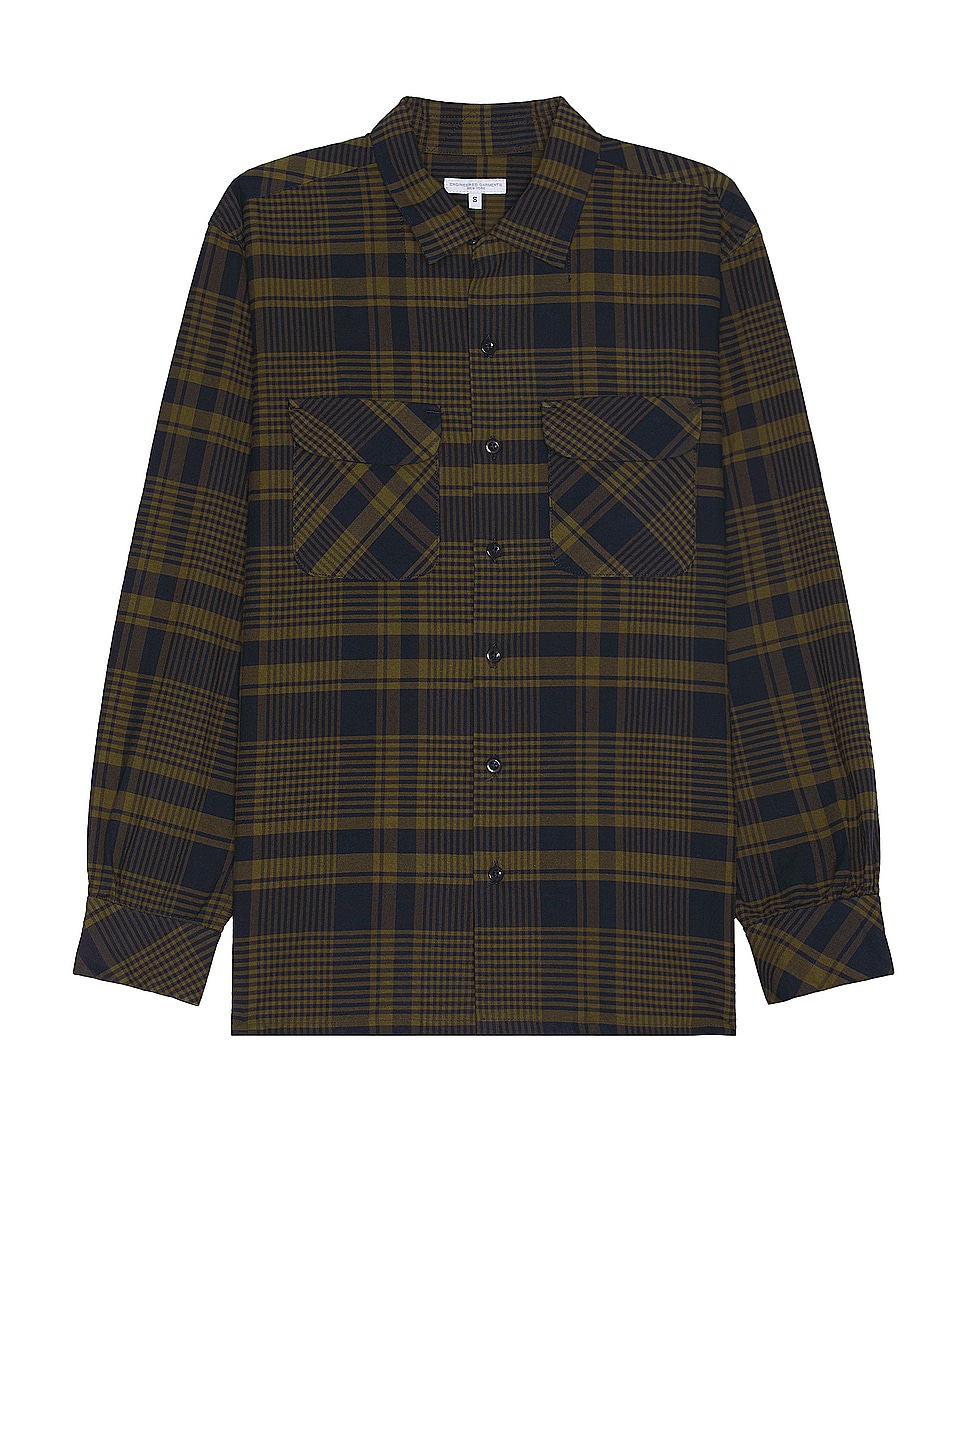 Image 1 of Engineered Garments Classic Shirt in in Navy & Olive